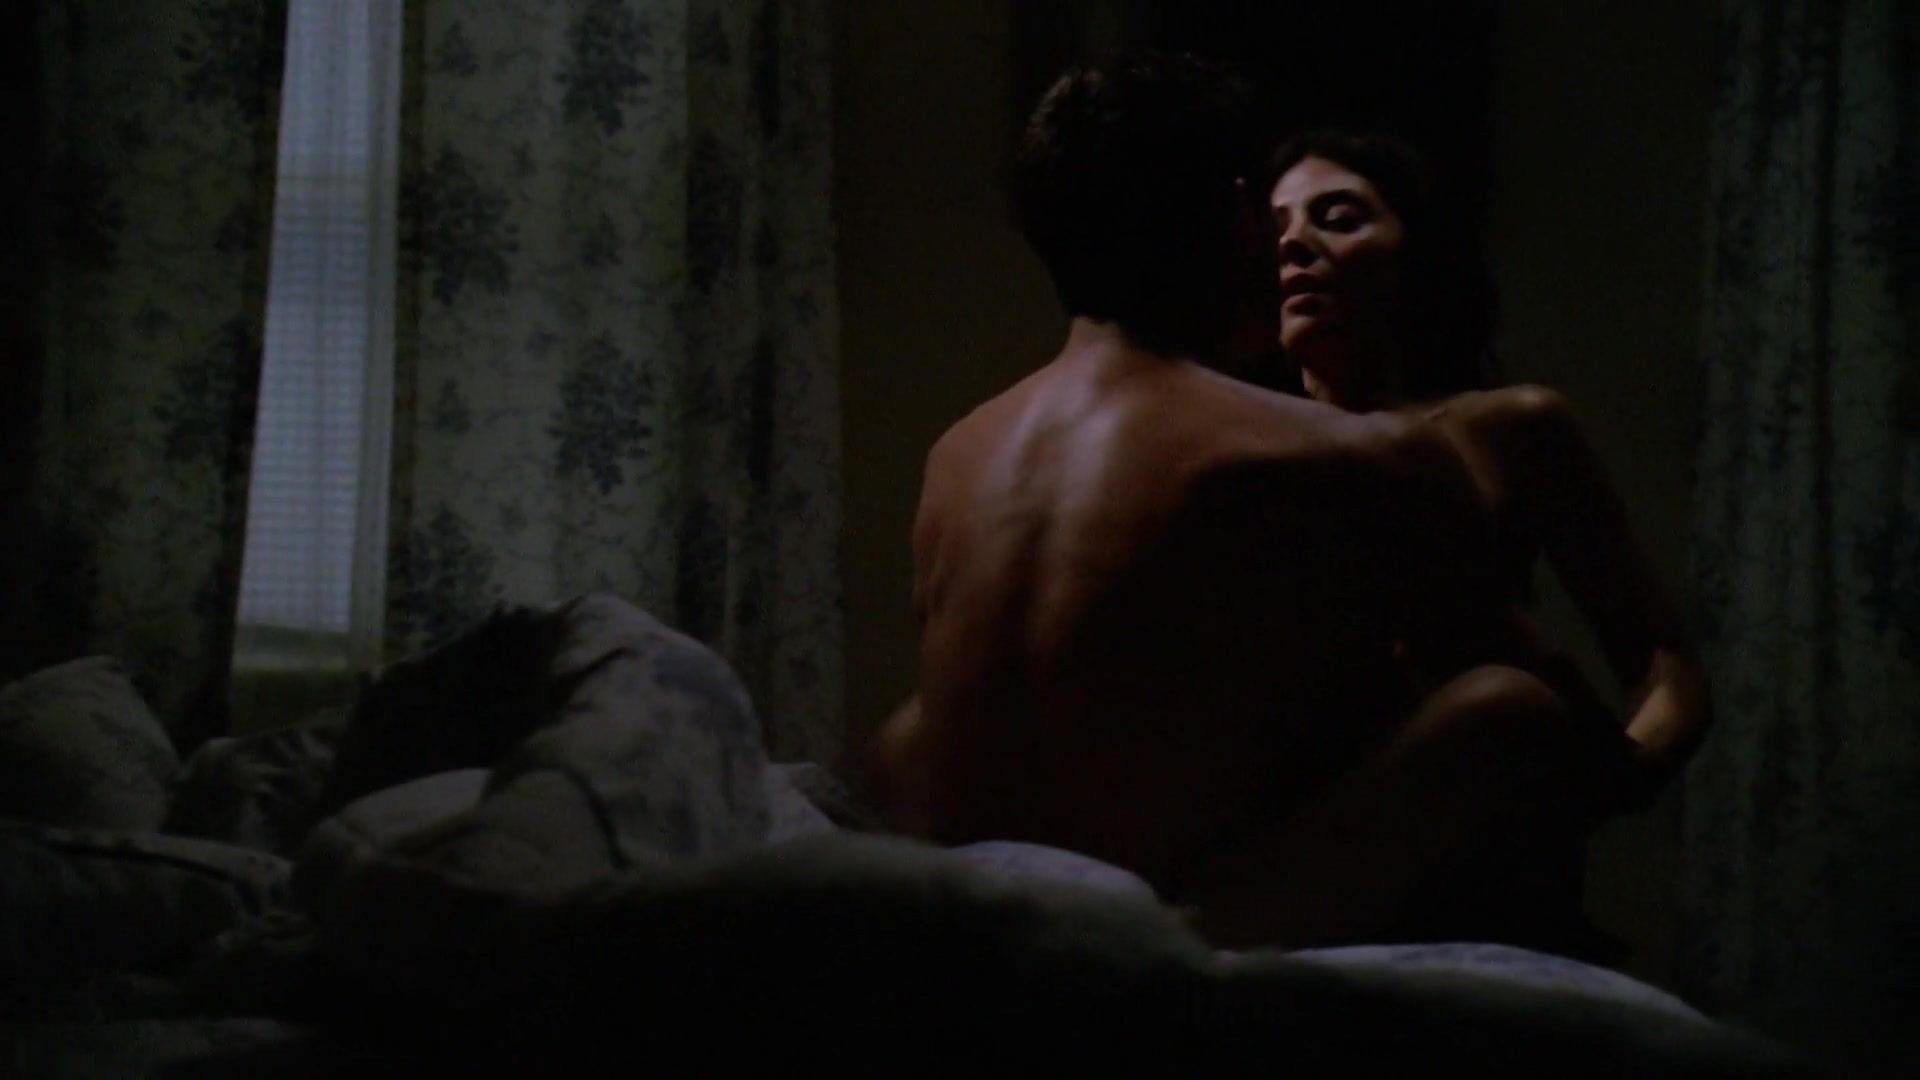 Prima Sexy Callie Thorne naked -The Wire s02e06 (2003) Free Amature Porn - 1